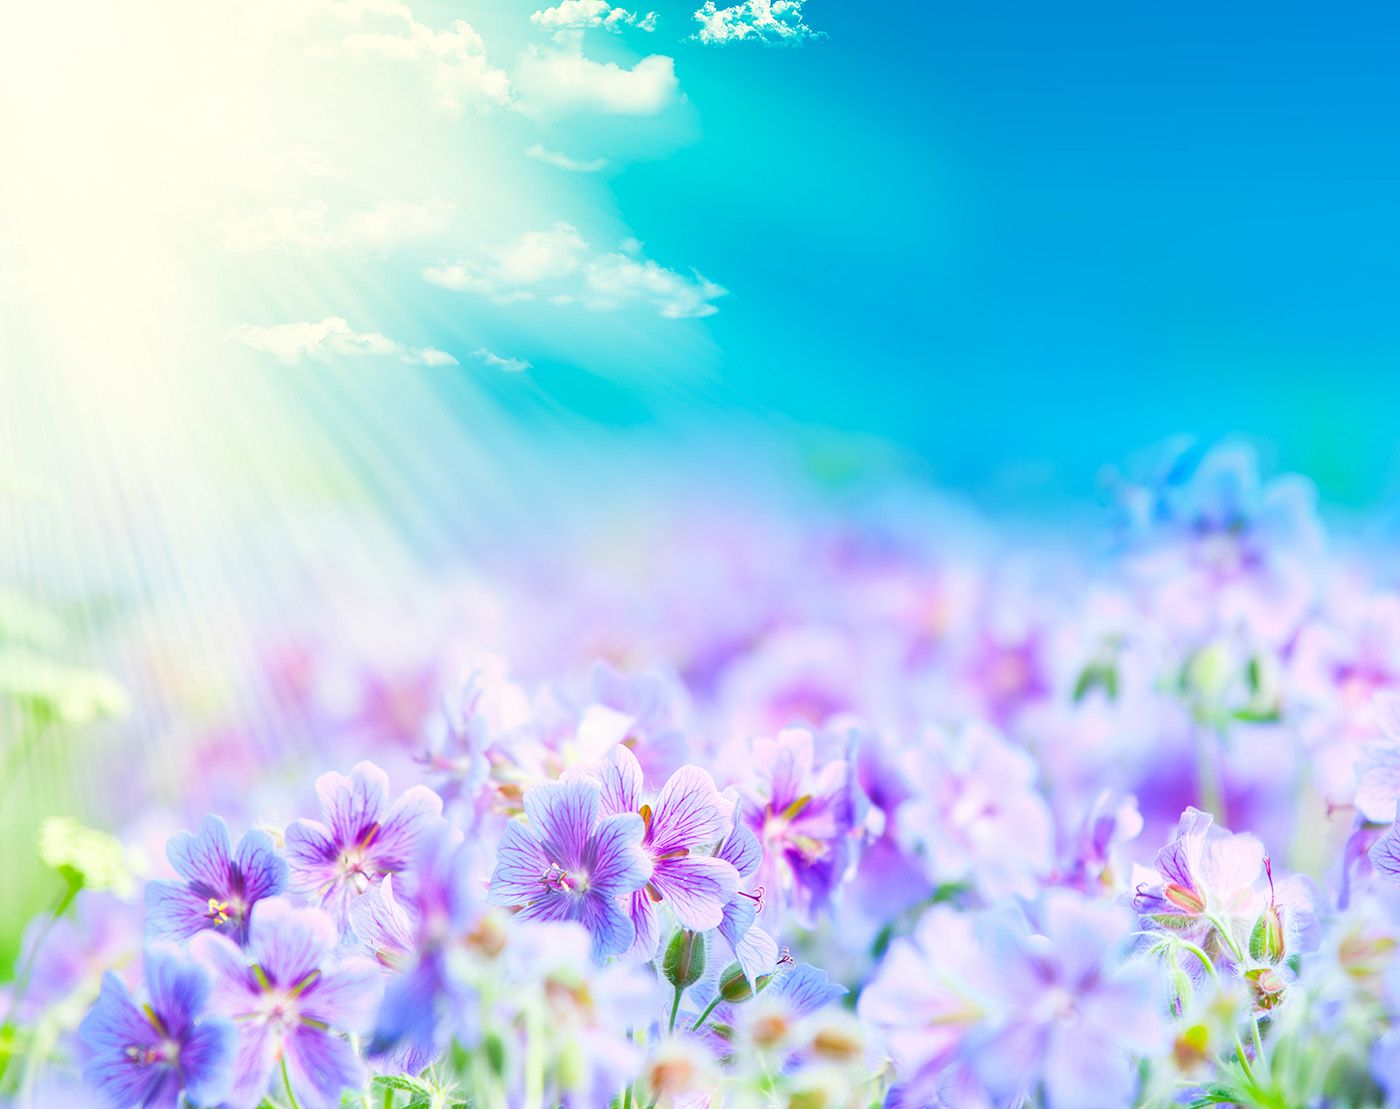 Blue sky with bright purple flowers 50090 Wallpaper